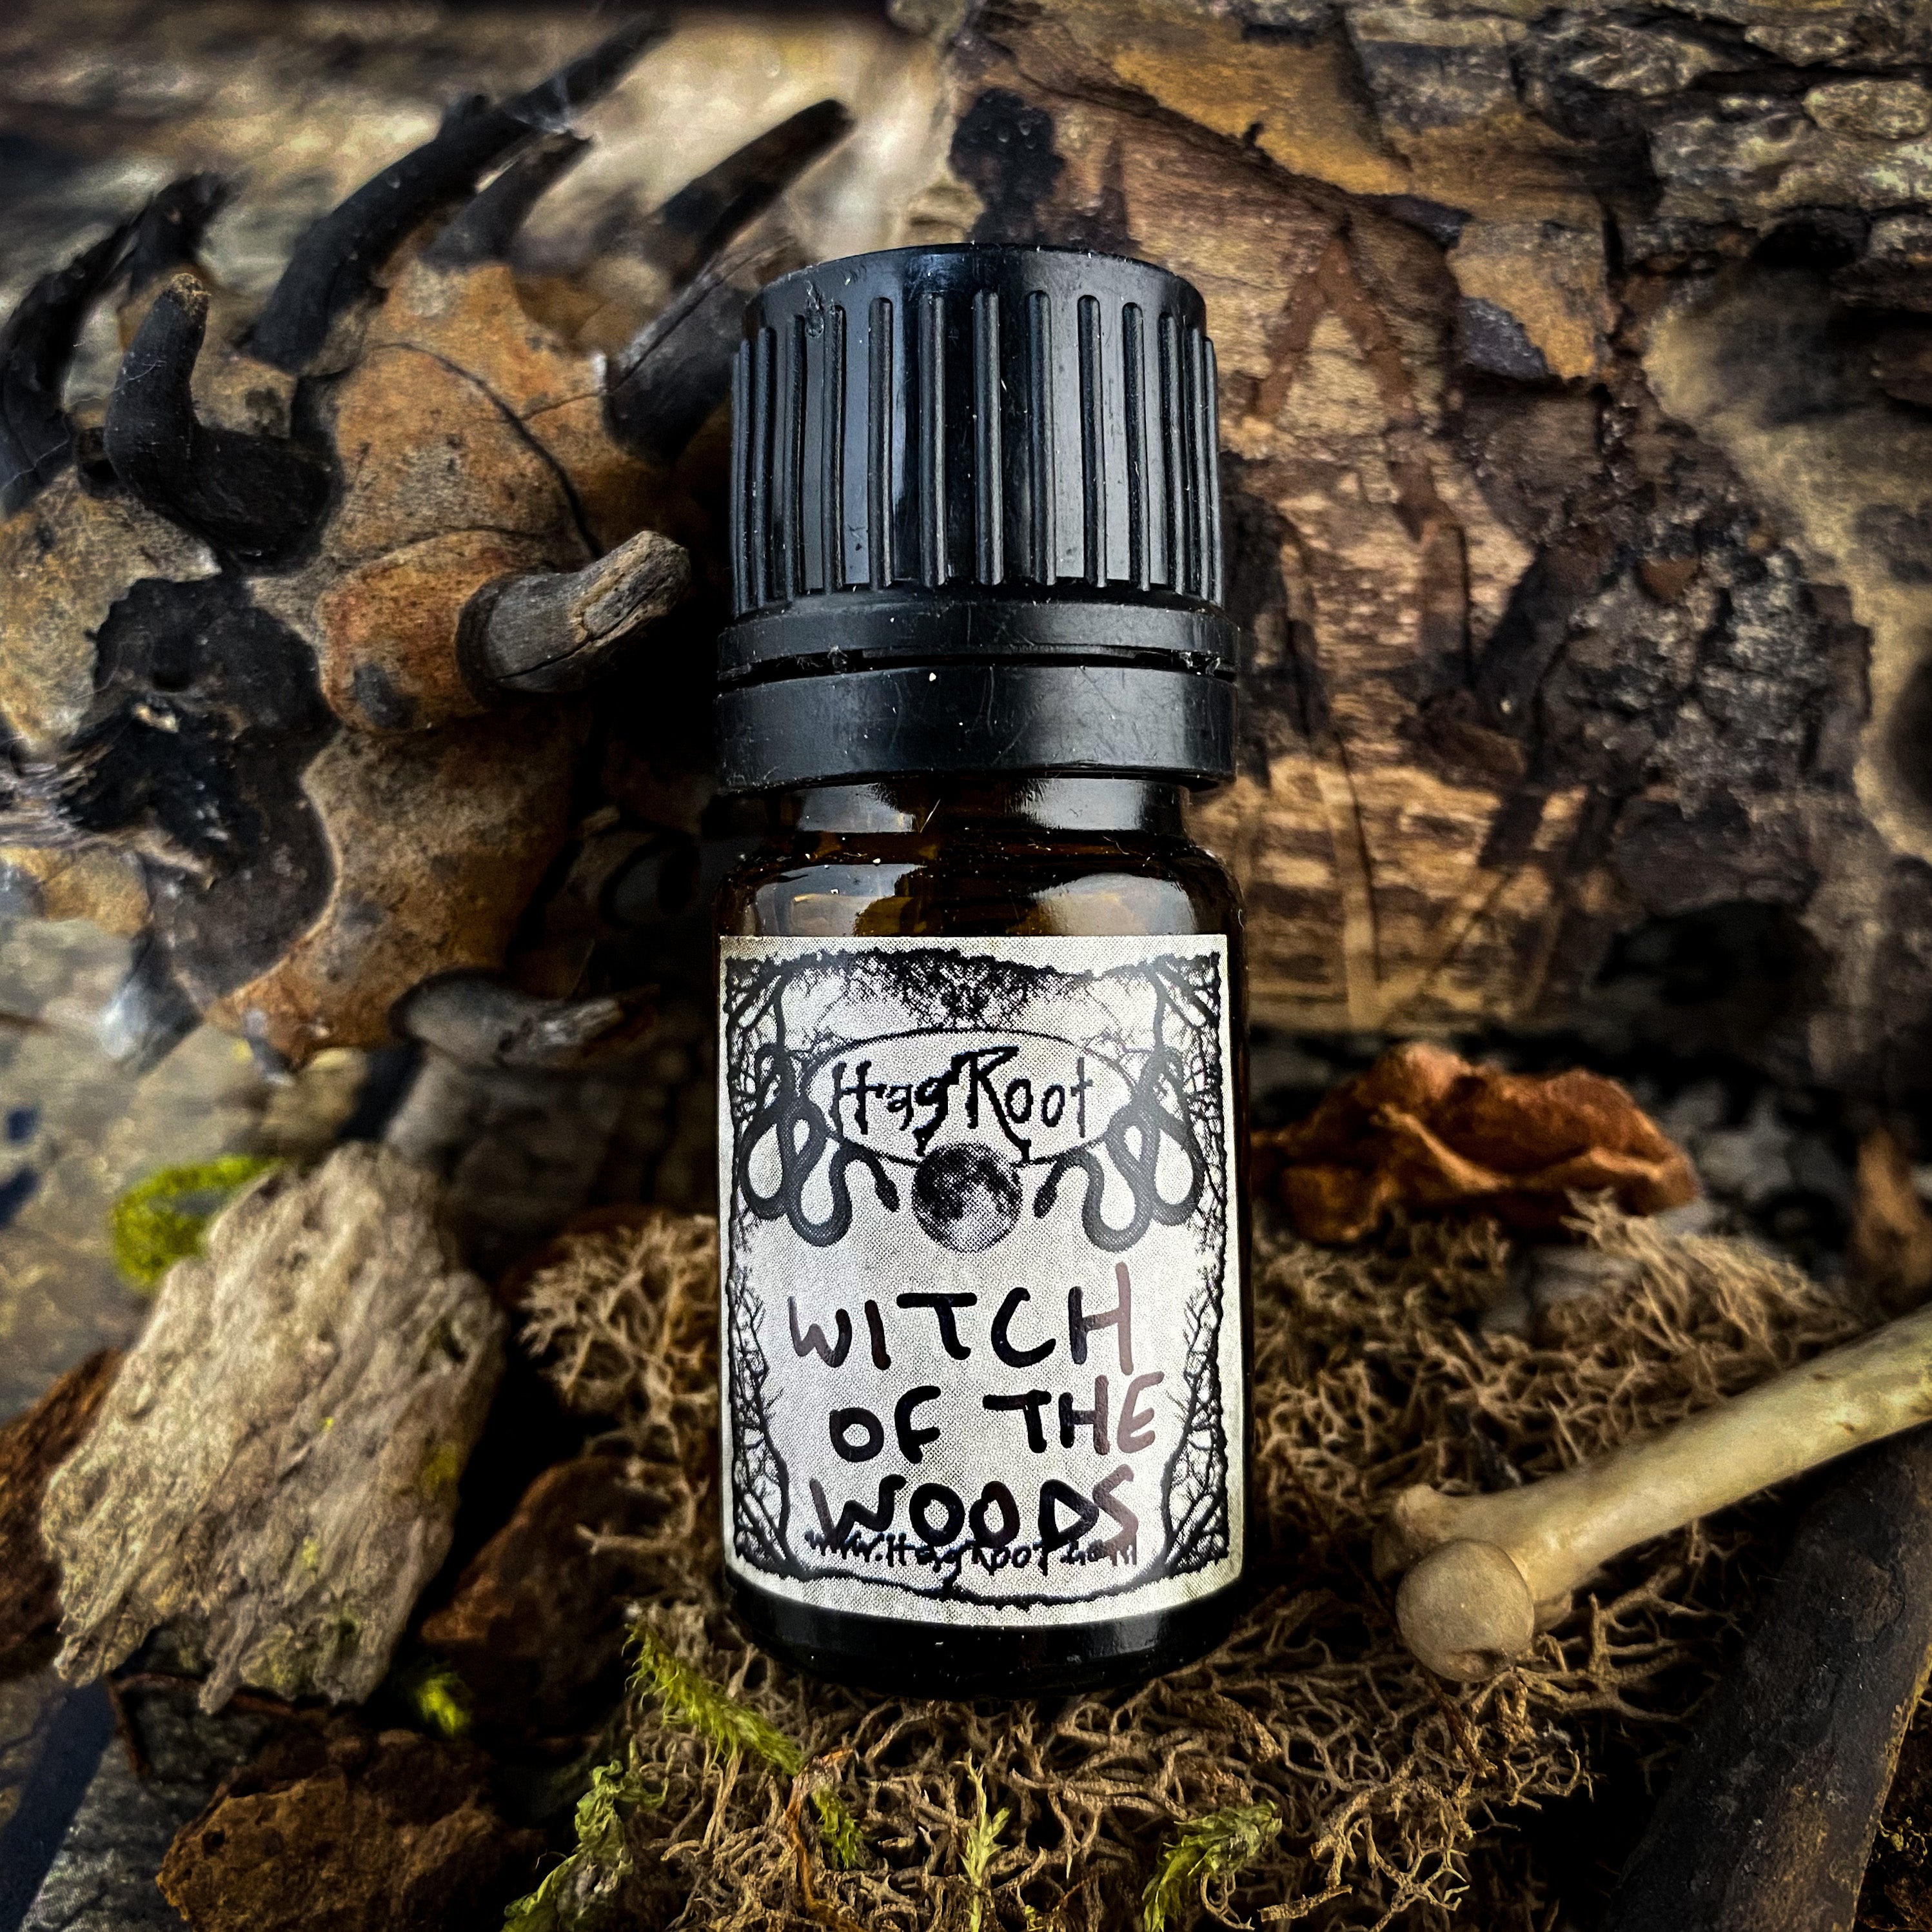 WITCH OF THE WOODS-(Evergreens and Mahogany Trees, Oakmoss and Ritual Fire)-Perfume, Cologne, Anointing, Ritual Oil